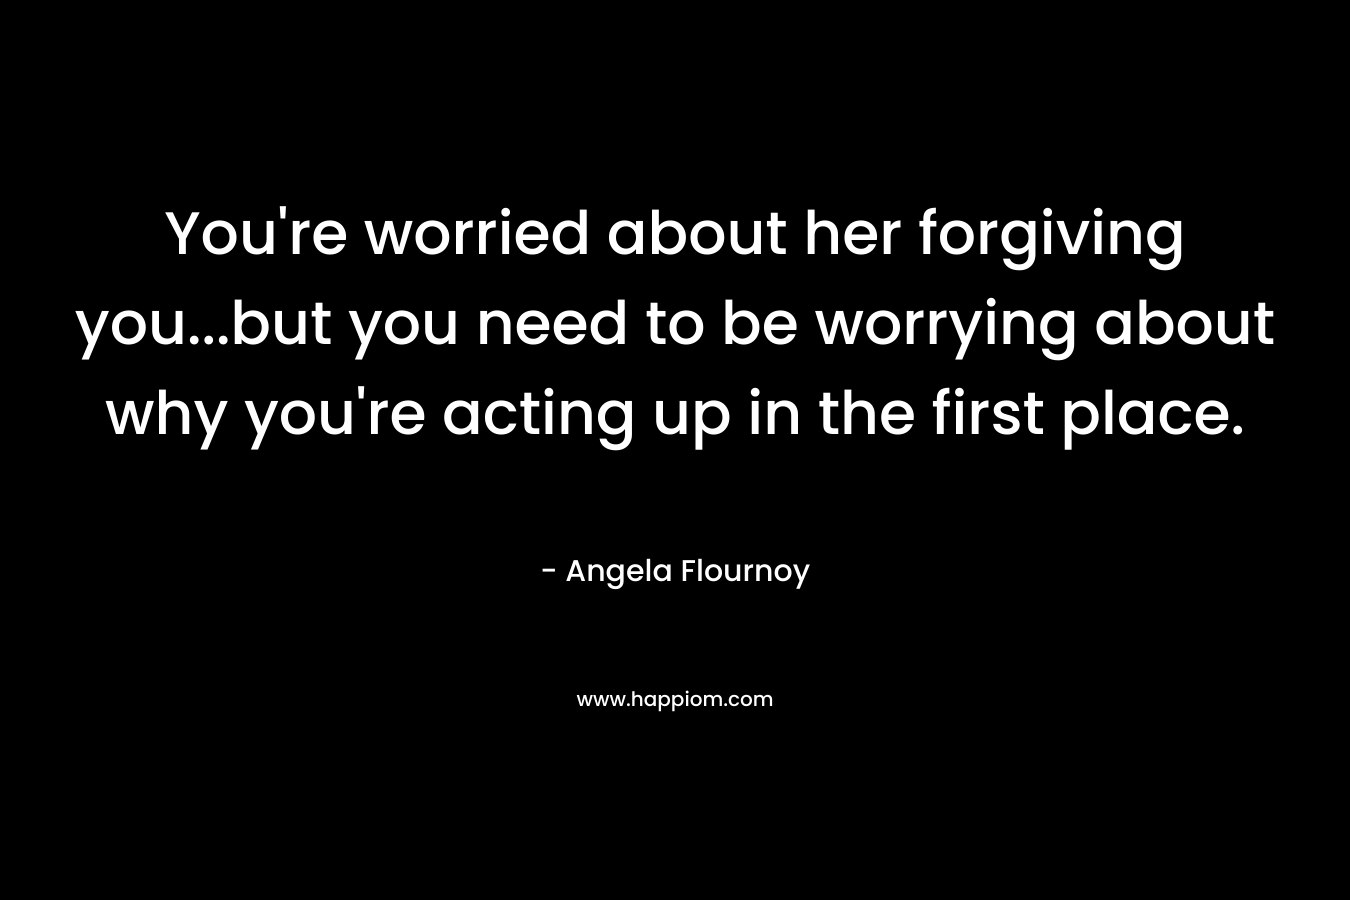 You’re worried about her forgiving you…but you need to be worrying about why you’re acting up in the first place. – Angela Flournoy